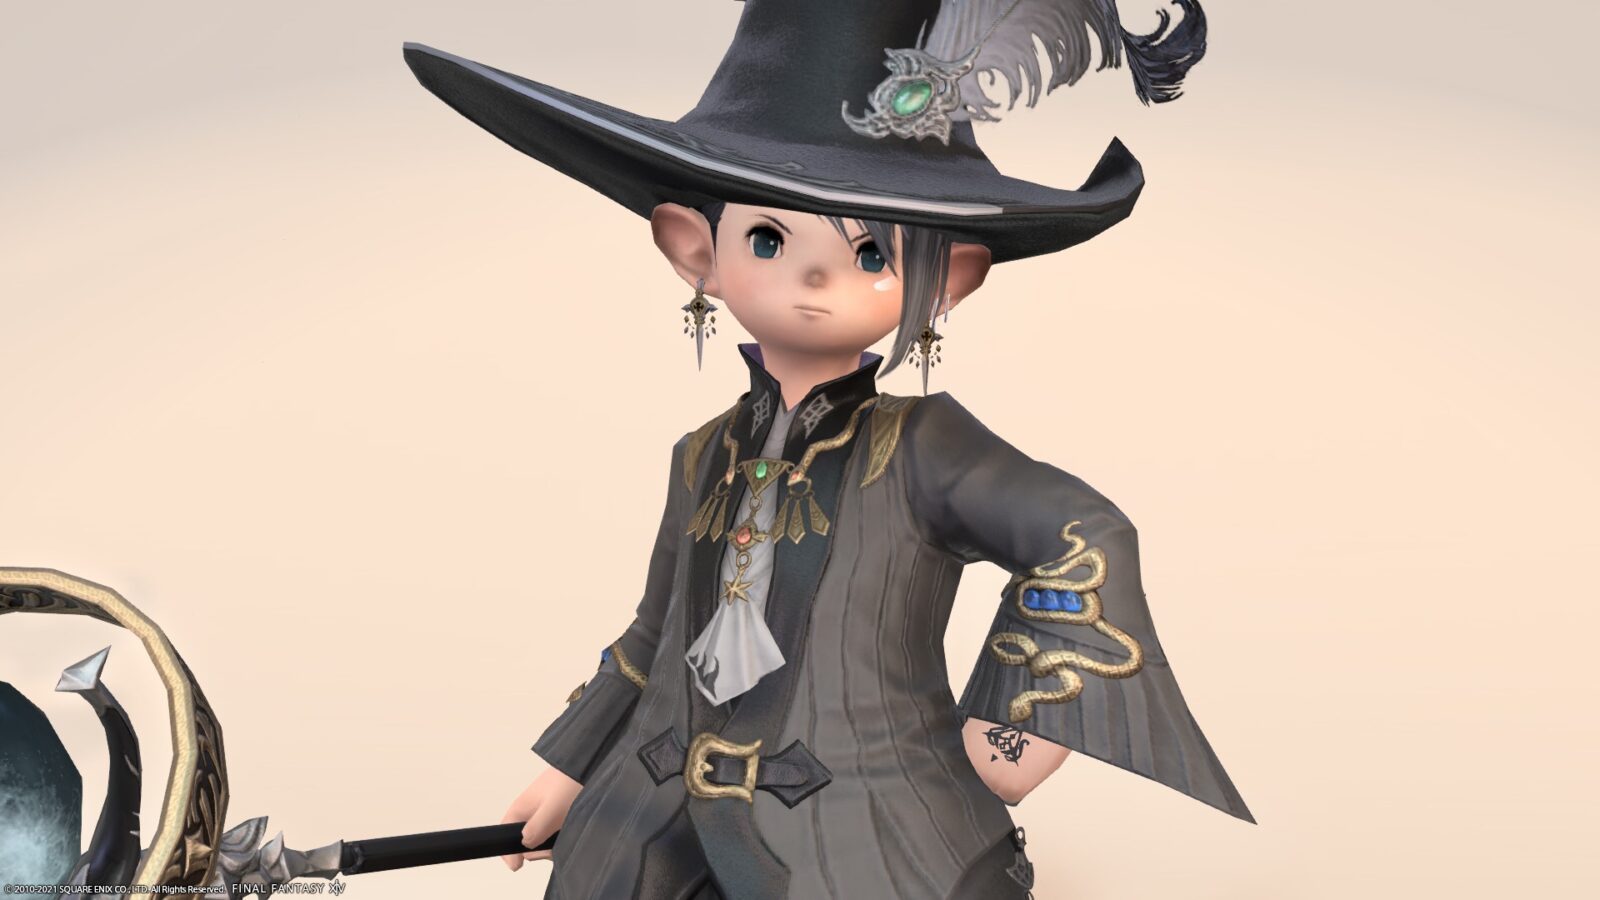 Black Mage AF4 equipment, cute noble witch clothes "Wicce" series...